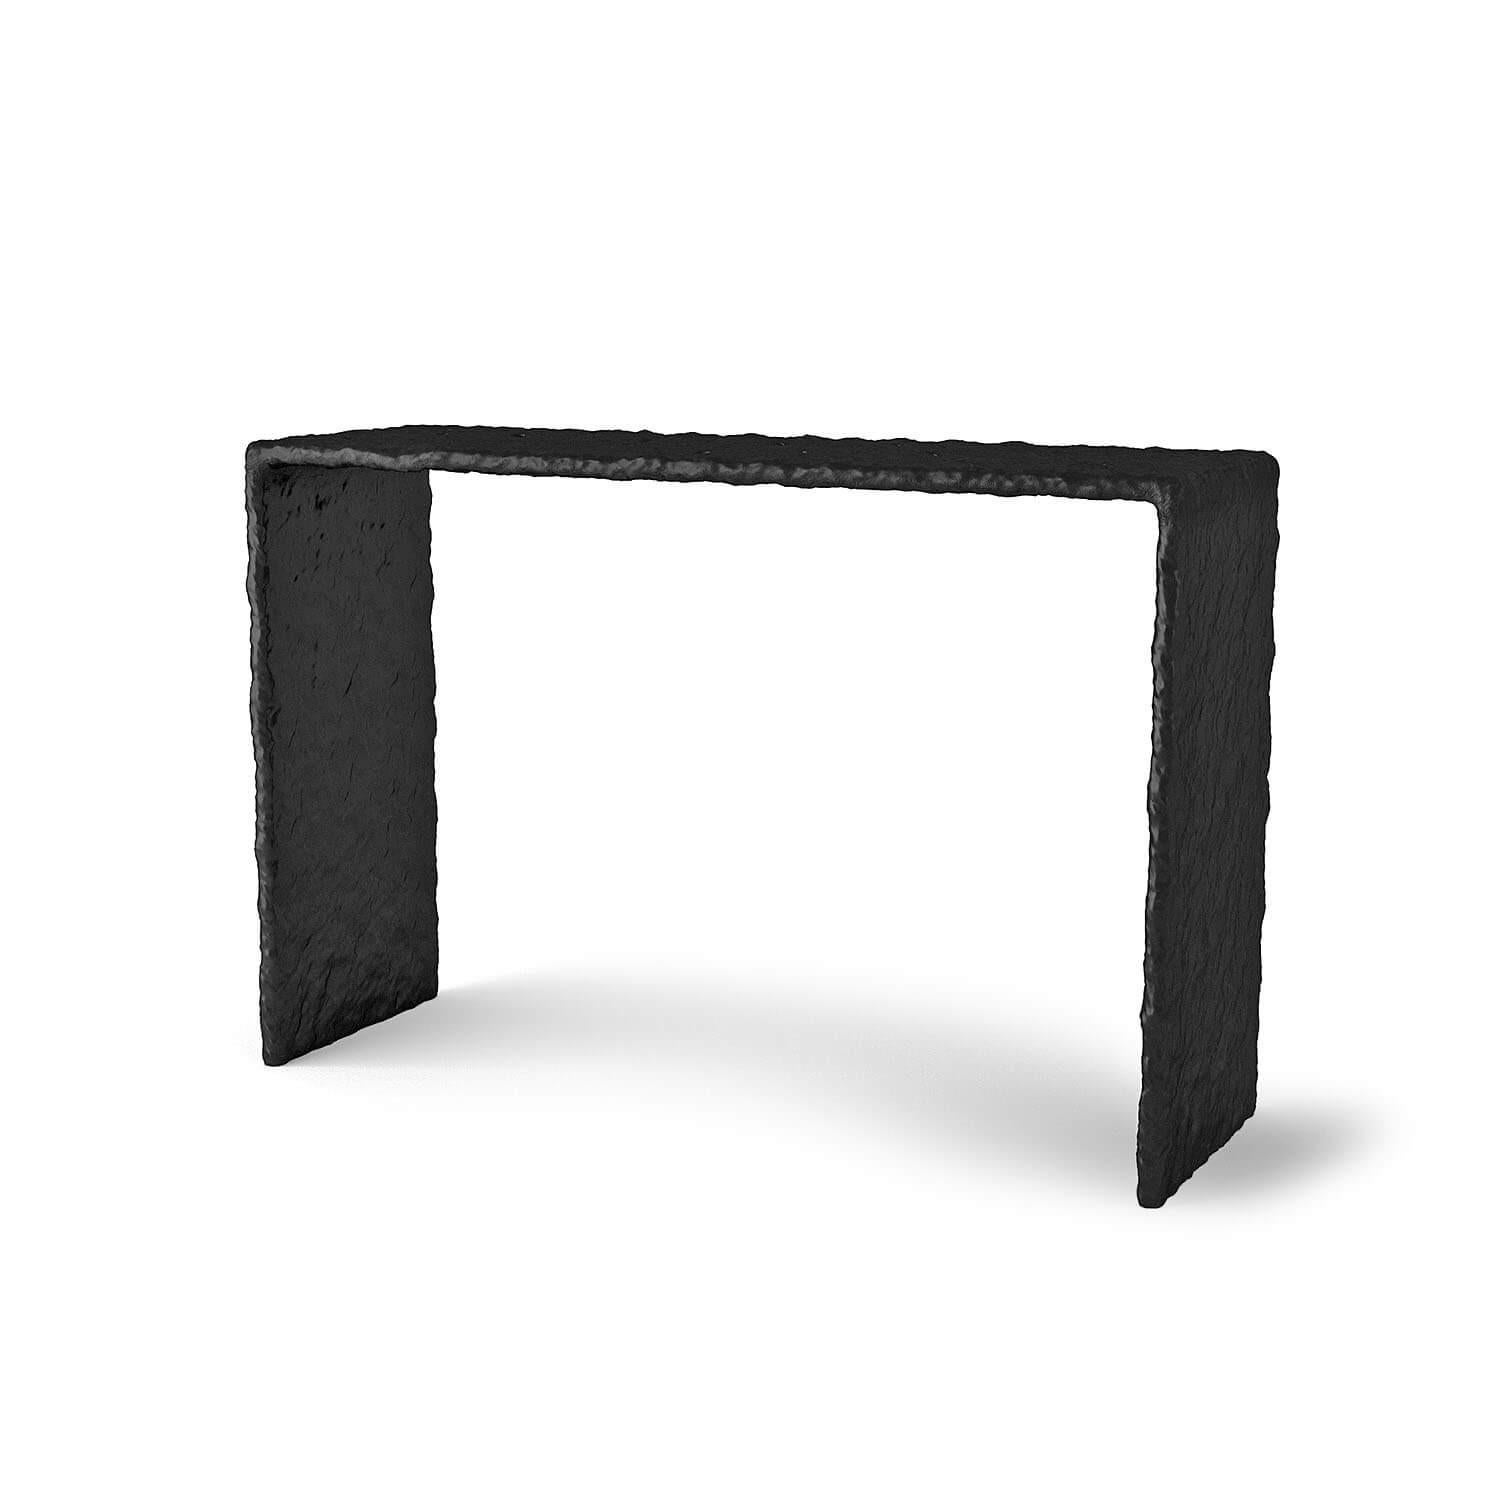 Organic Modern Sculpted Contemporary Console Table by Victoria Yakusha